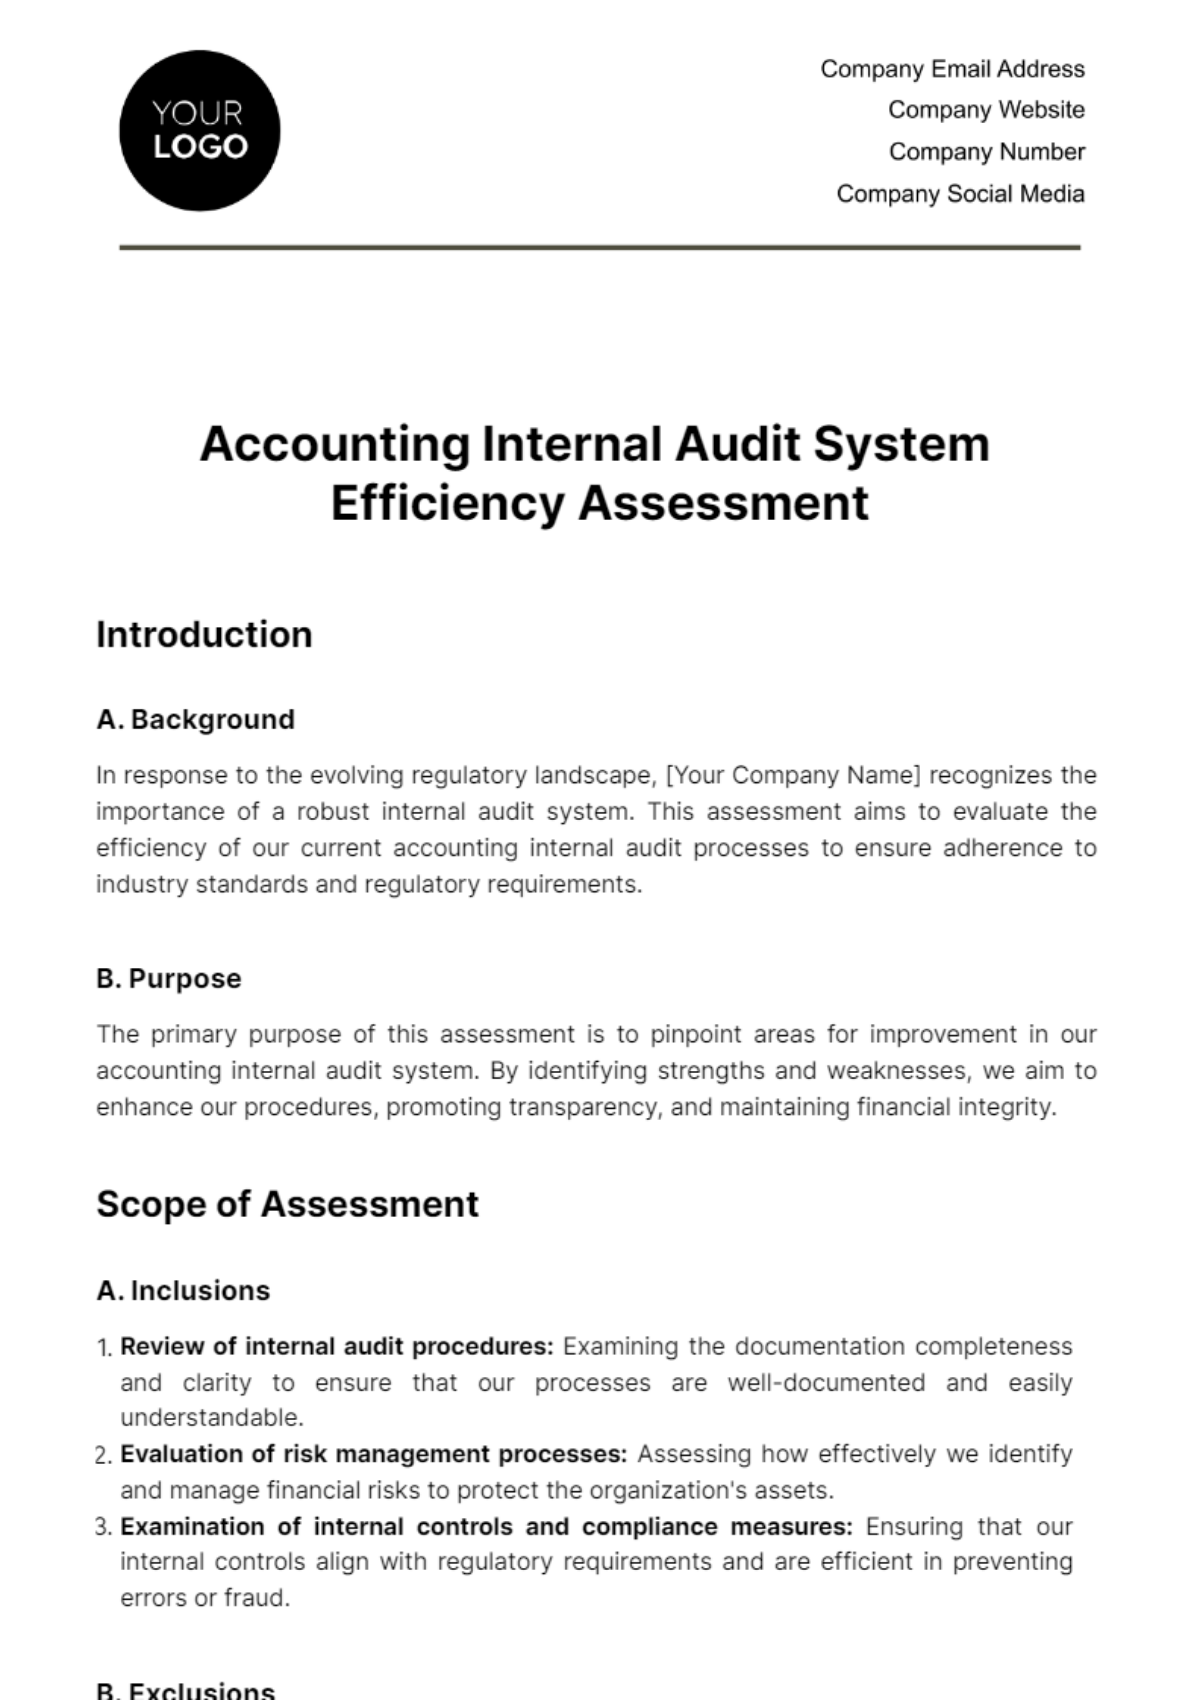 Accounting Internal Audit System Efficiency Assessment Template